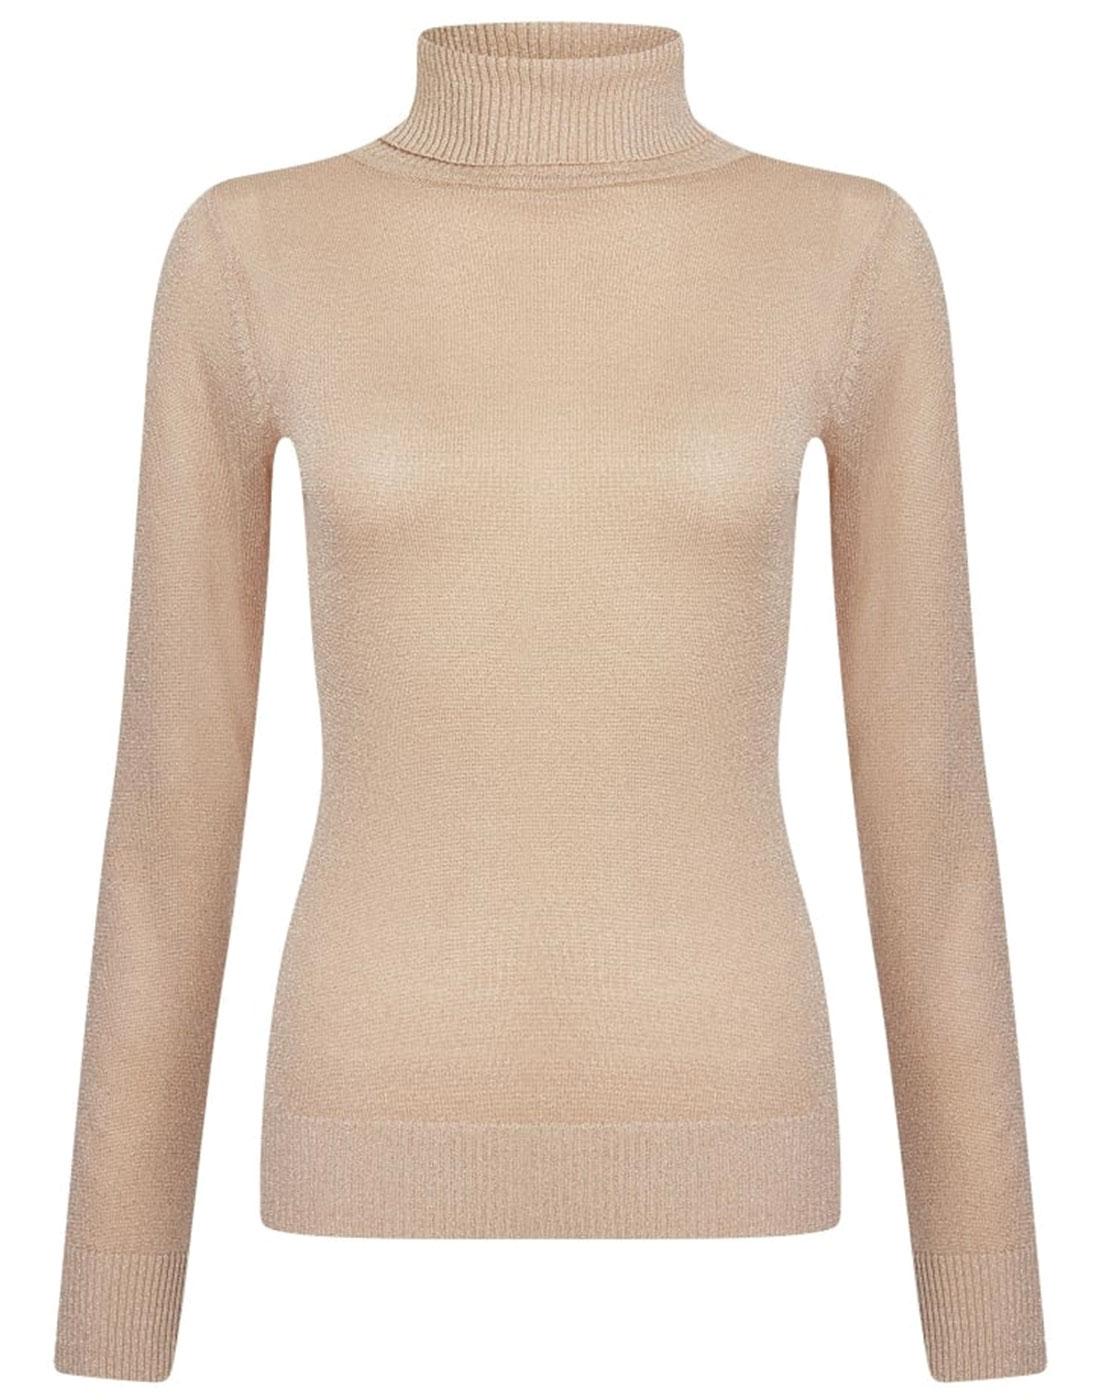 BRIGHT & BEAUTIFUL Tova 60s Mod Knitted Turtle Neck Top in Gold